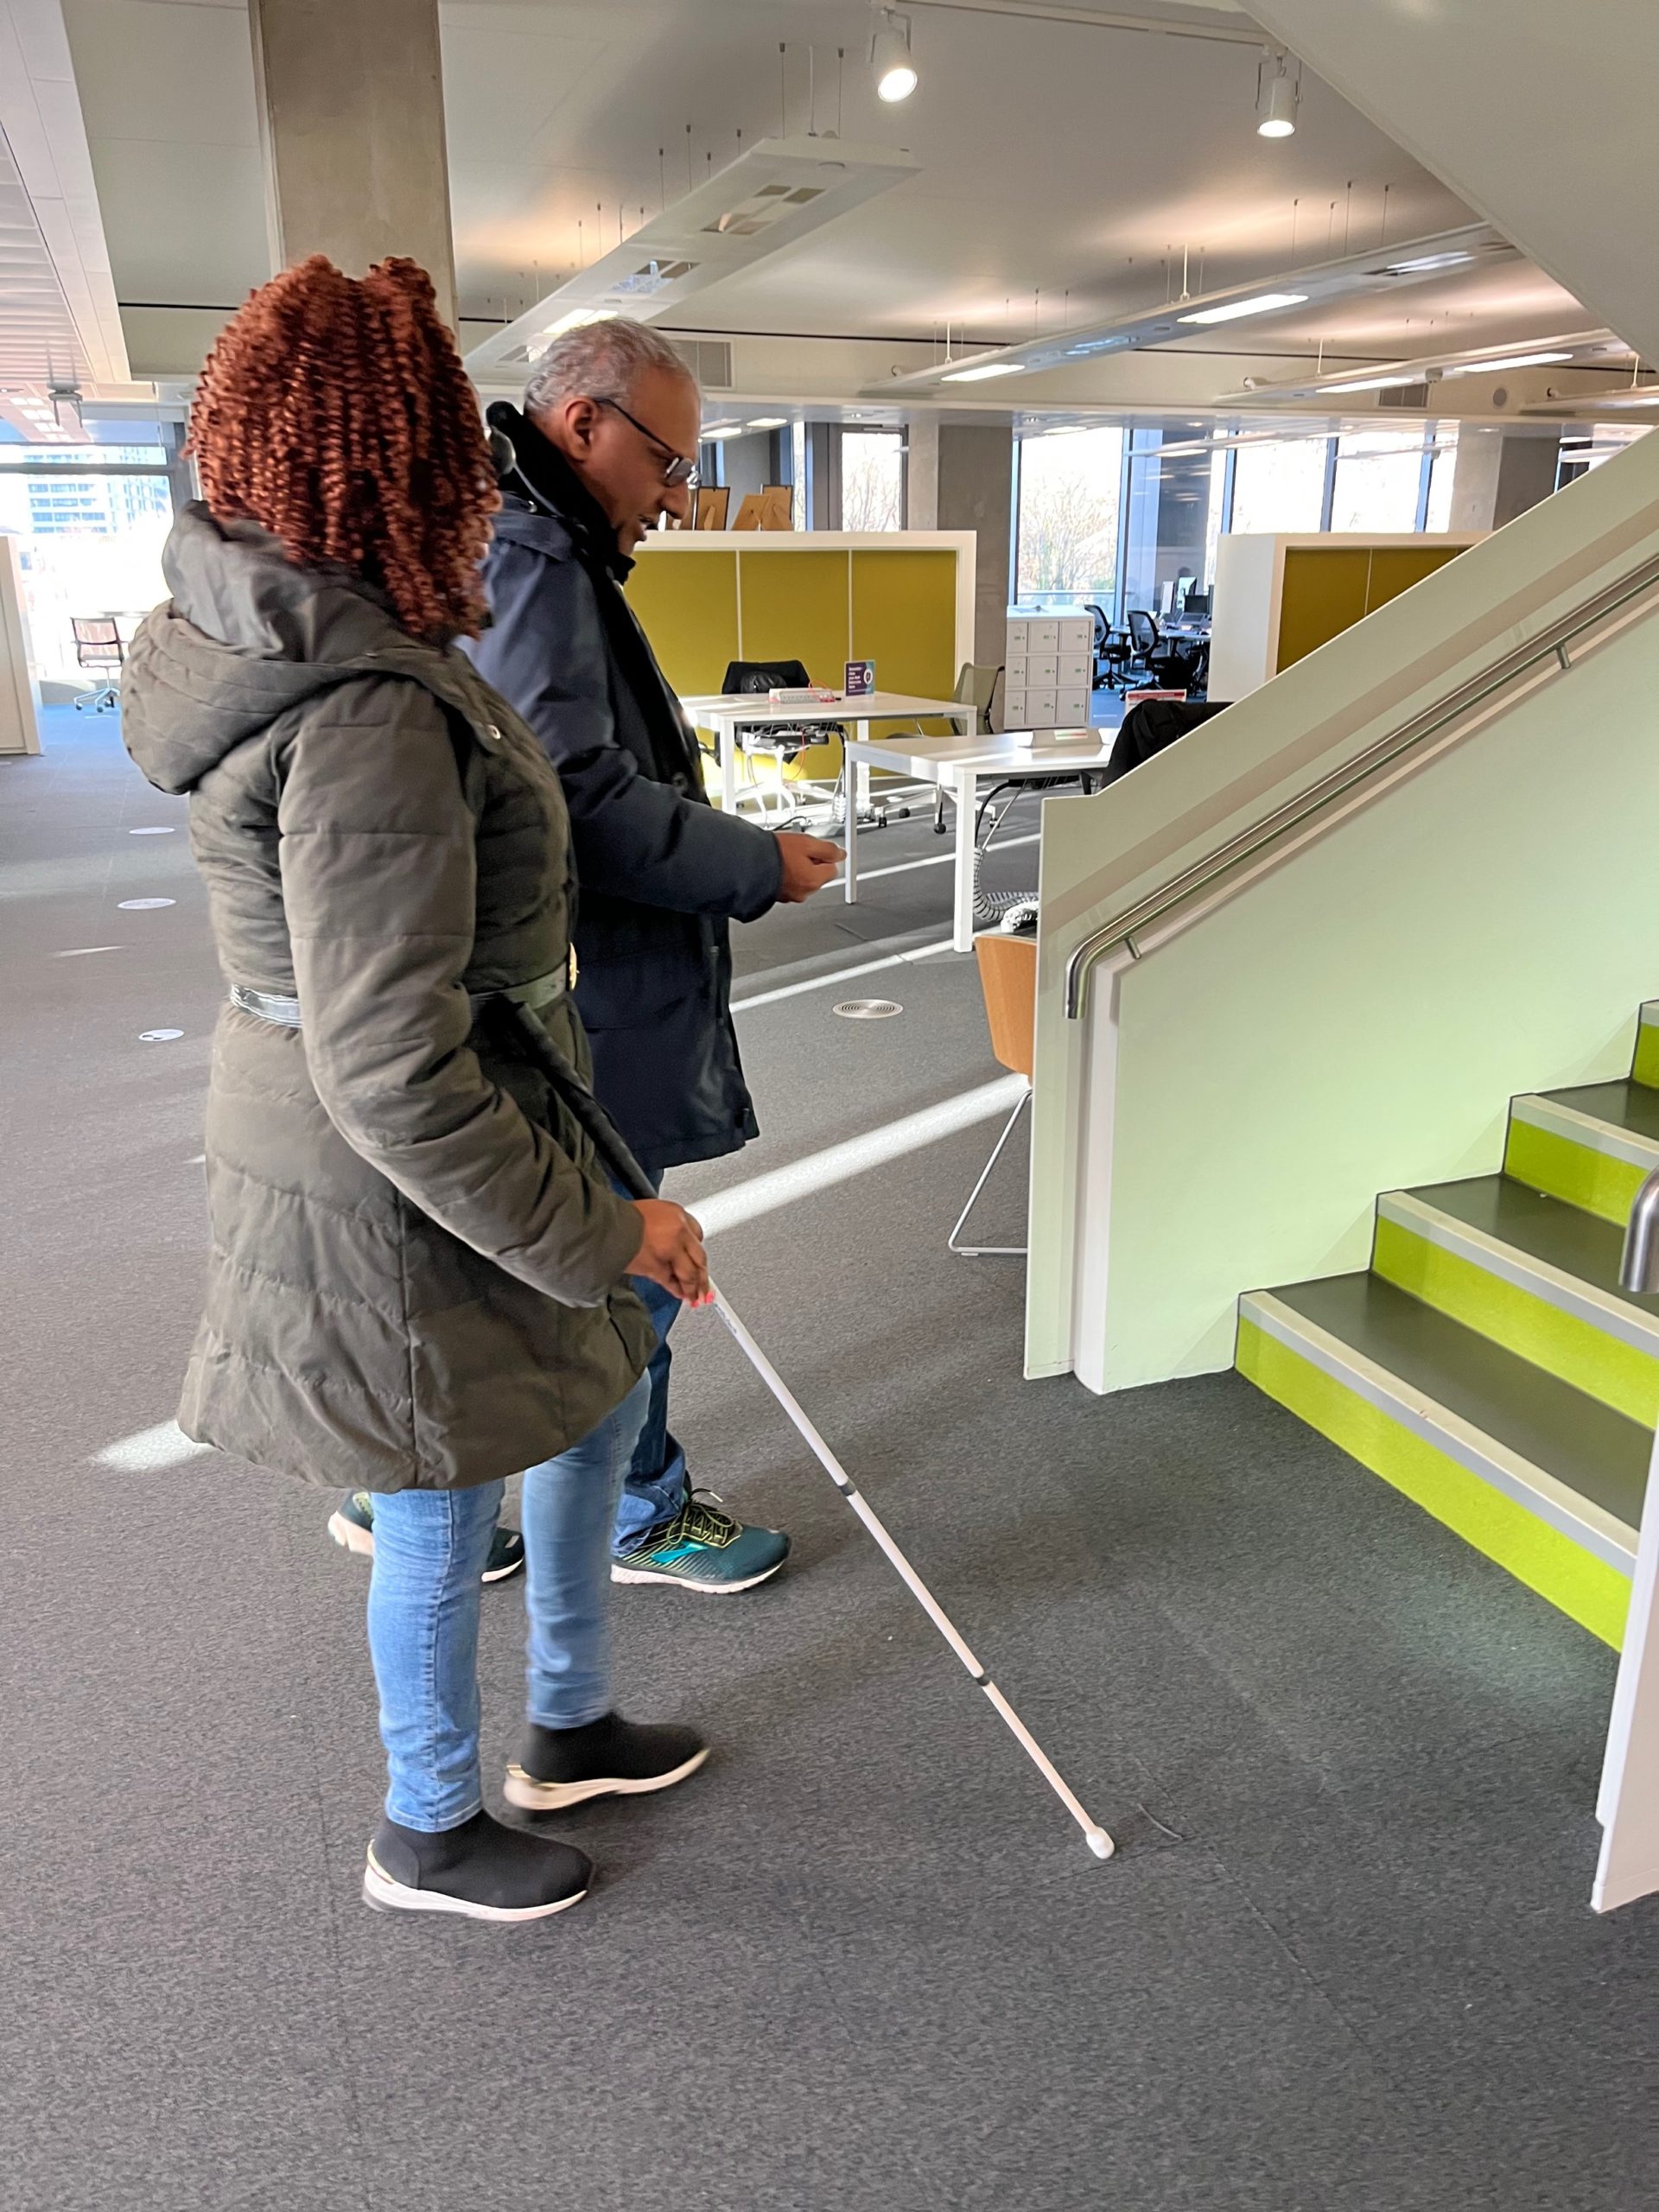 Image shows a lady holding a white cane, standing next to a man. He is about to guide her up a staircase.